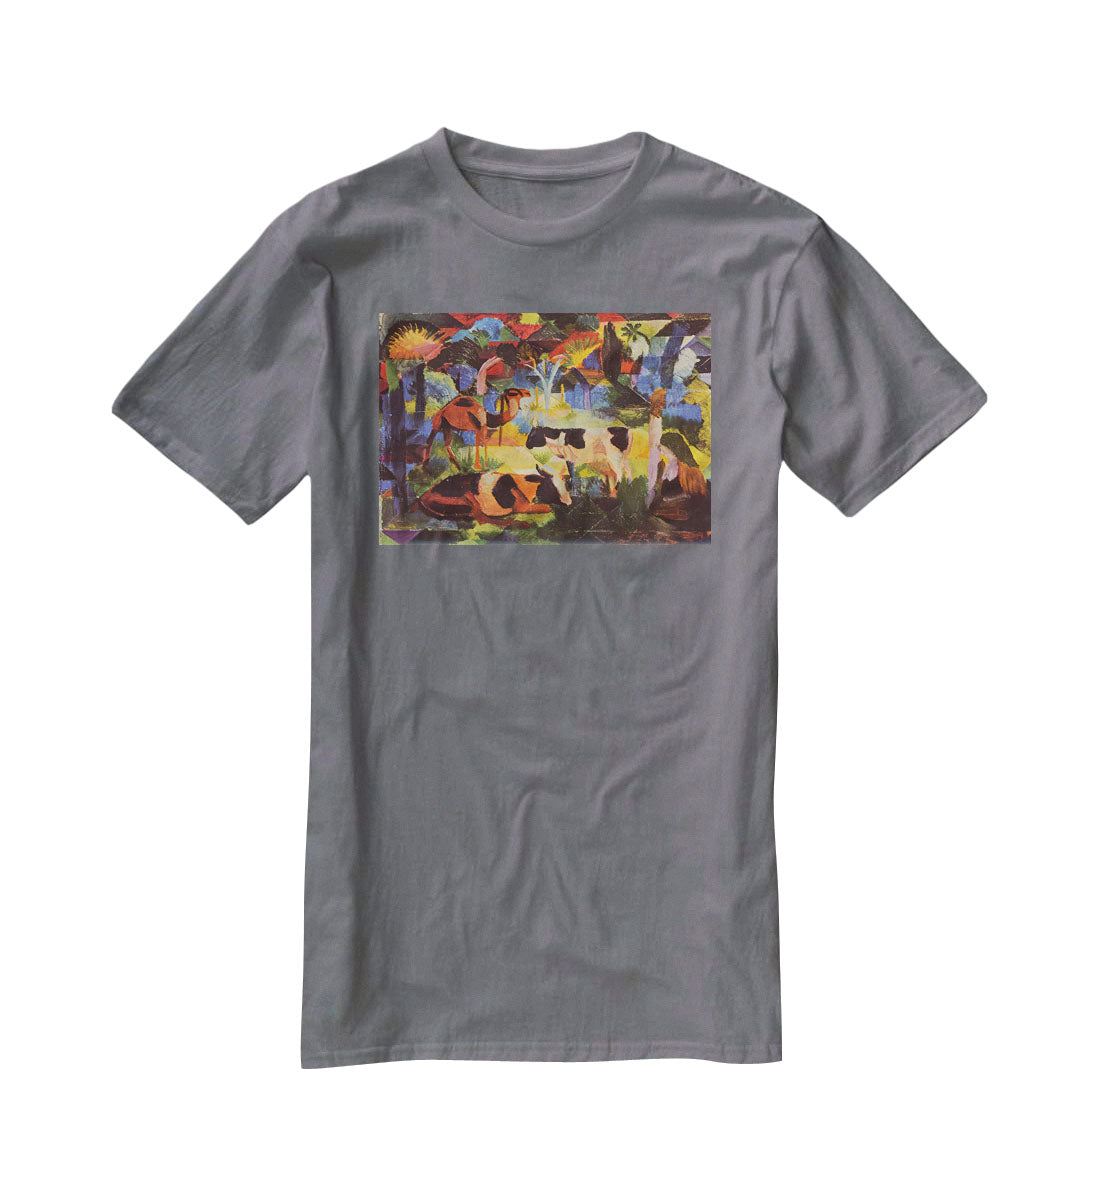 Landscape with cows and camels by Macke T-Shirt - Canvas Art Rocks - 3